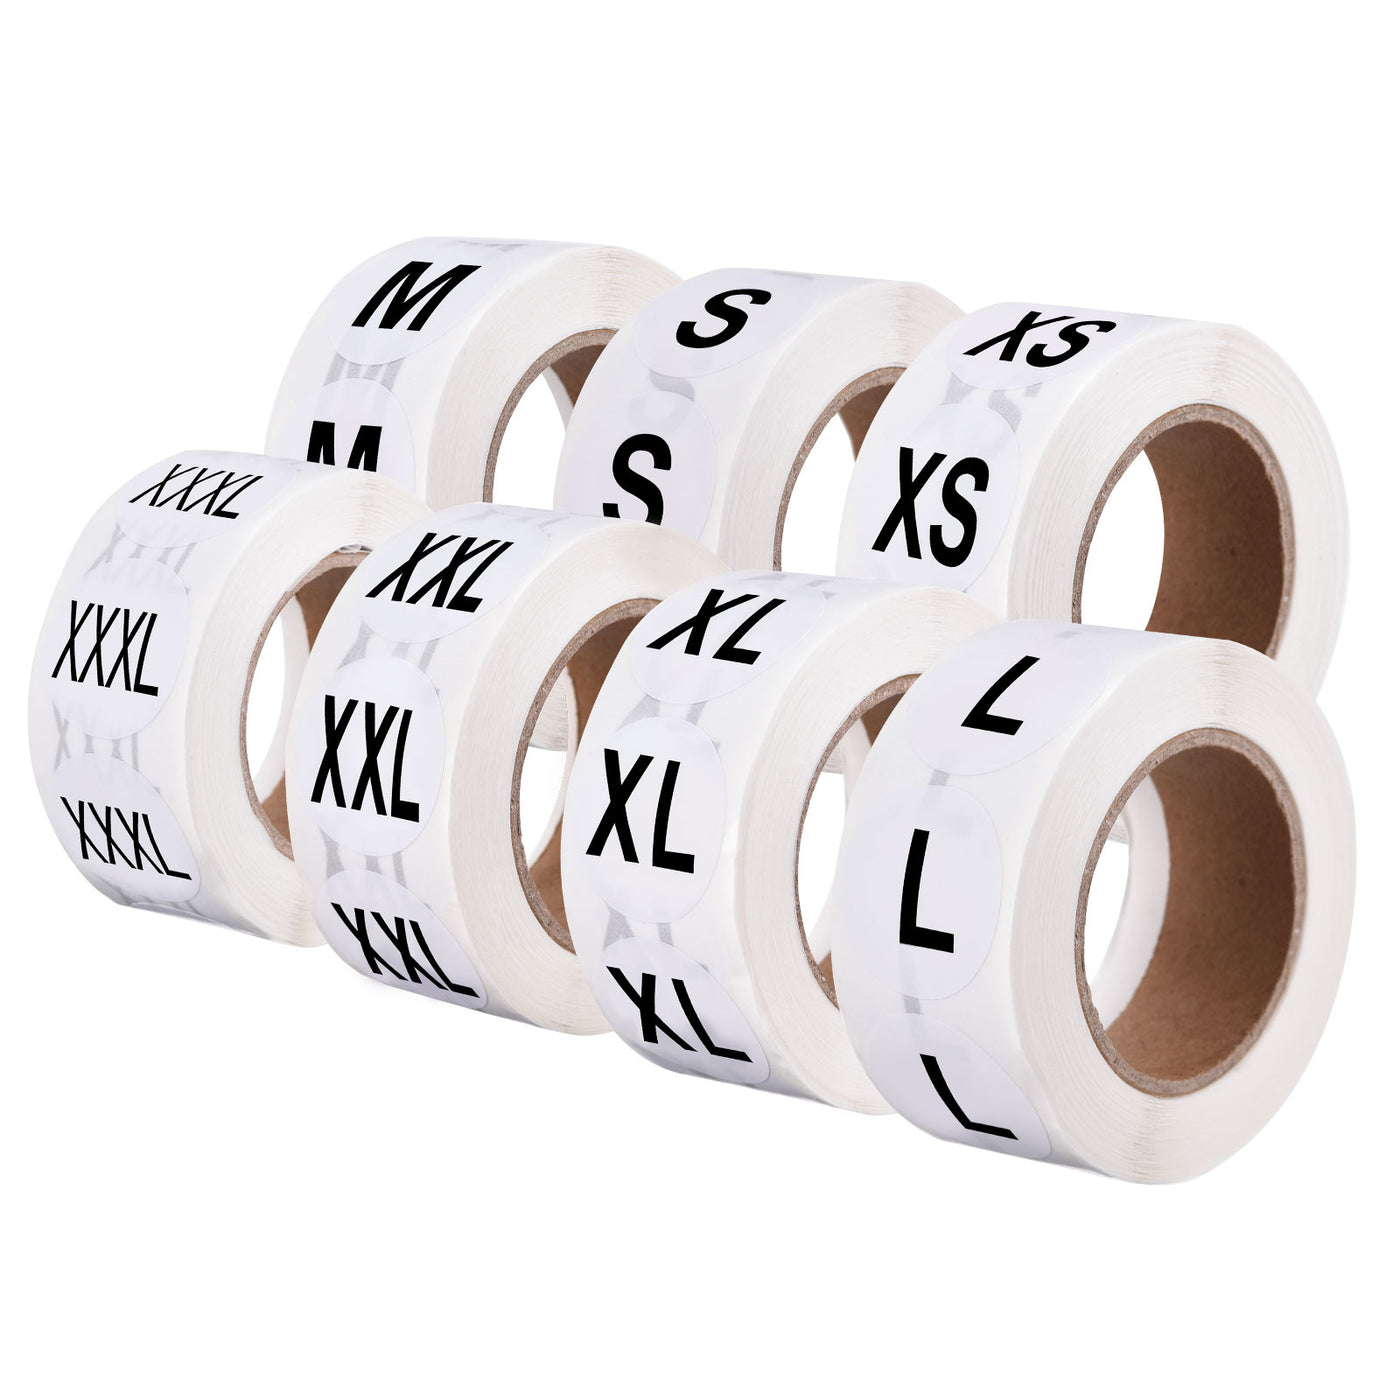 Harfington Clothing XS/S/M/L/XL/XXL/XXXL Size Sticker Label Coding Label 25mm/1inch Dia 7 Roll 3500 Round Adhesive Labels for Clothes Apparel